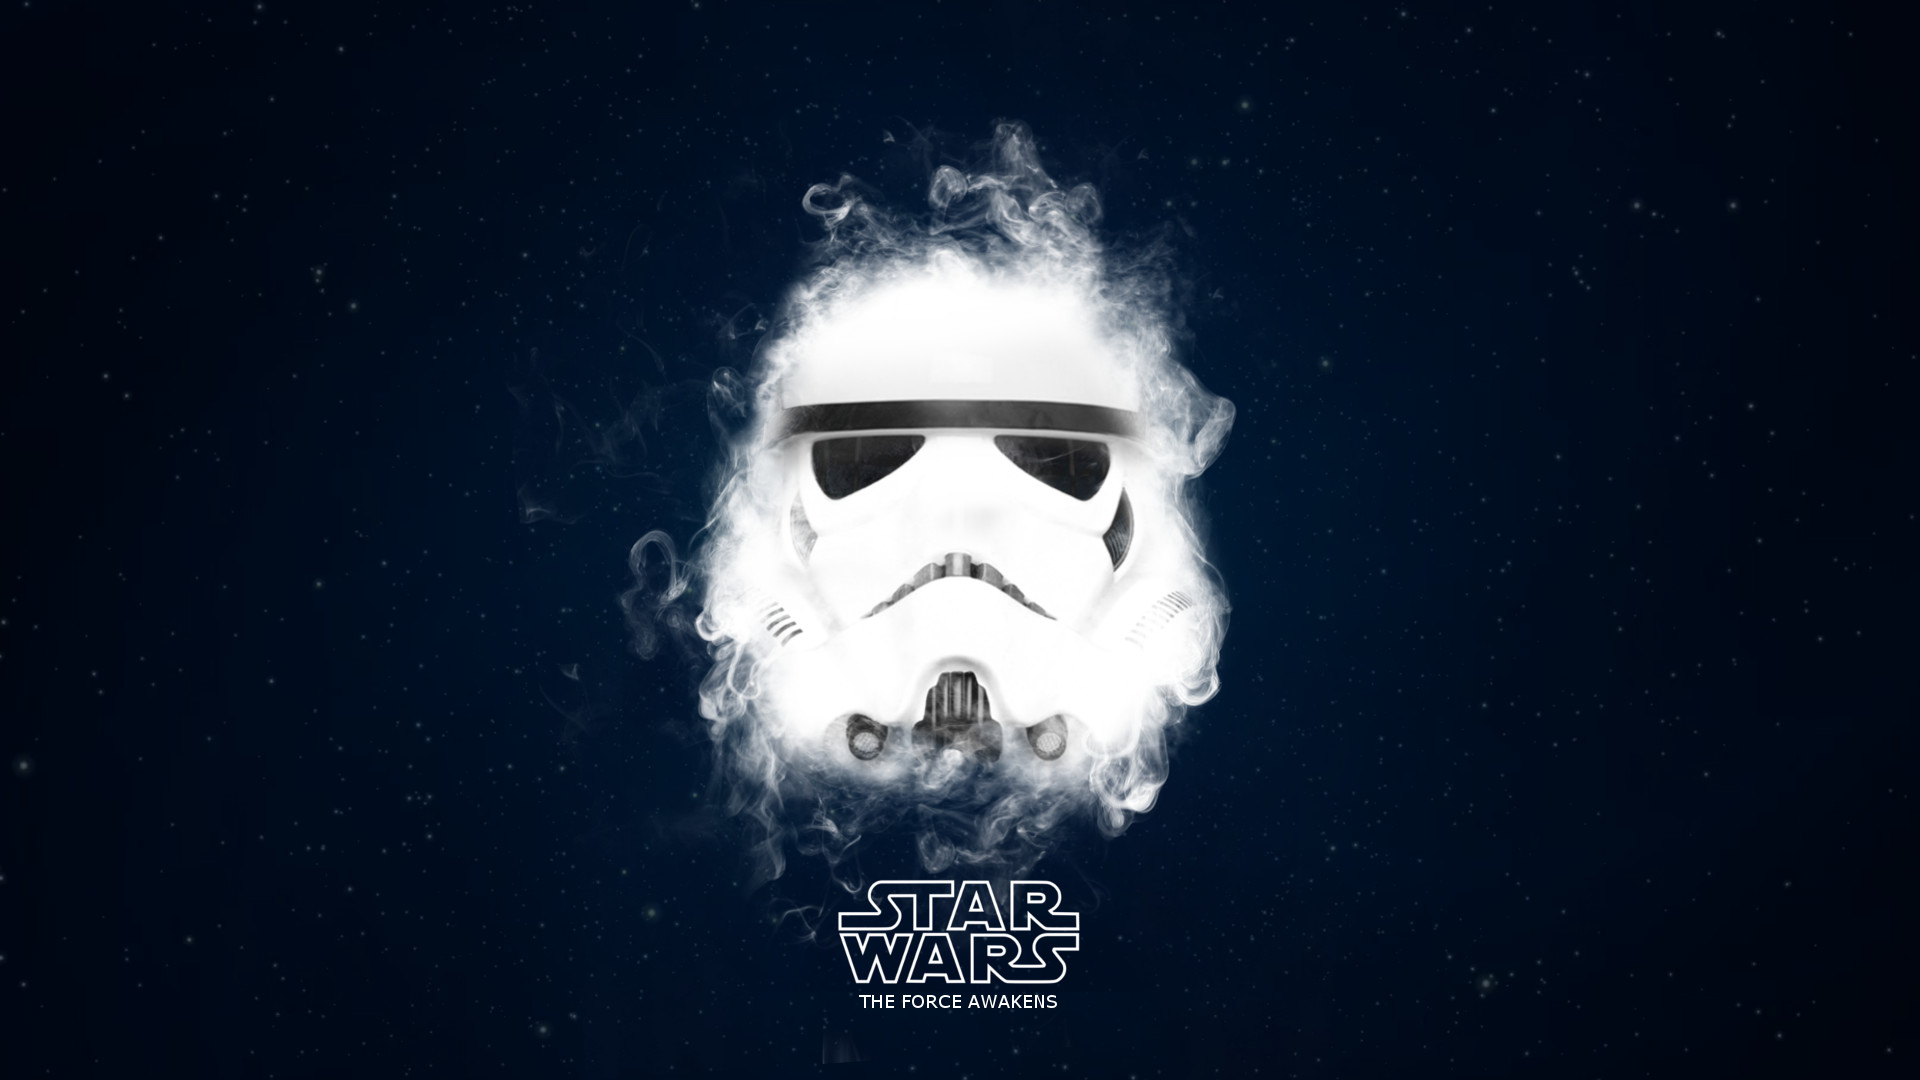 1920x1080 ... Star Wars - Stormtrooper - The Force Awakens by TLDesignn